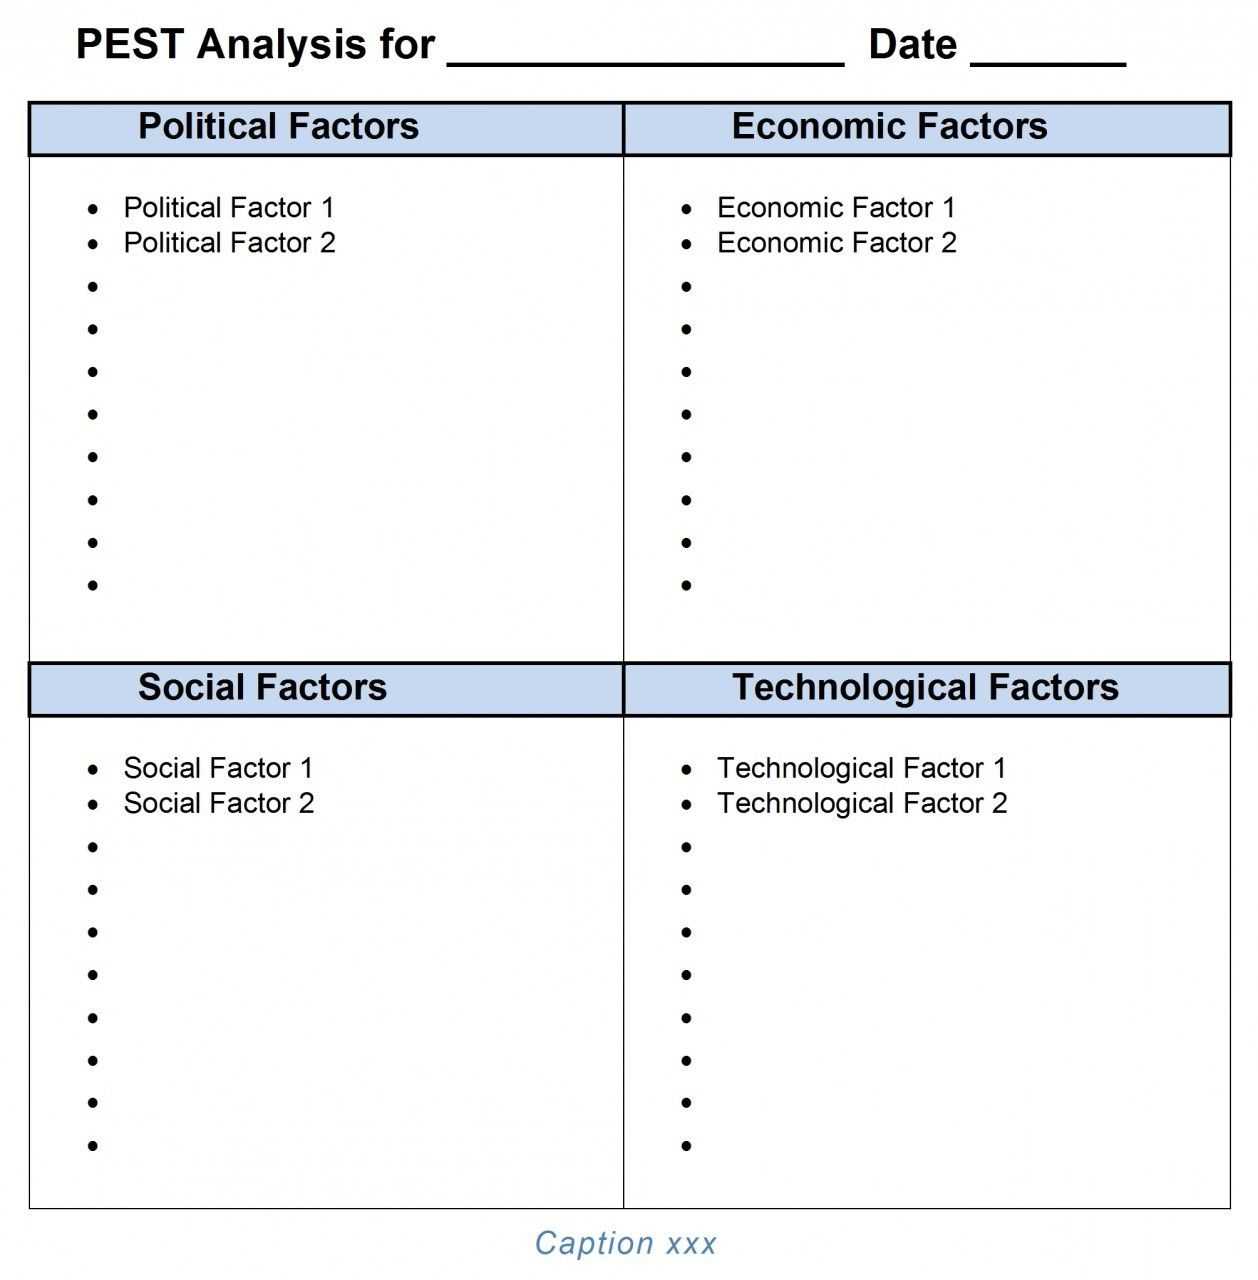 Pest Analysis Ms Word Template | Words, Templates Regarding Pestel Analysis Template Word